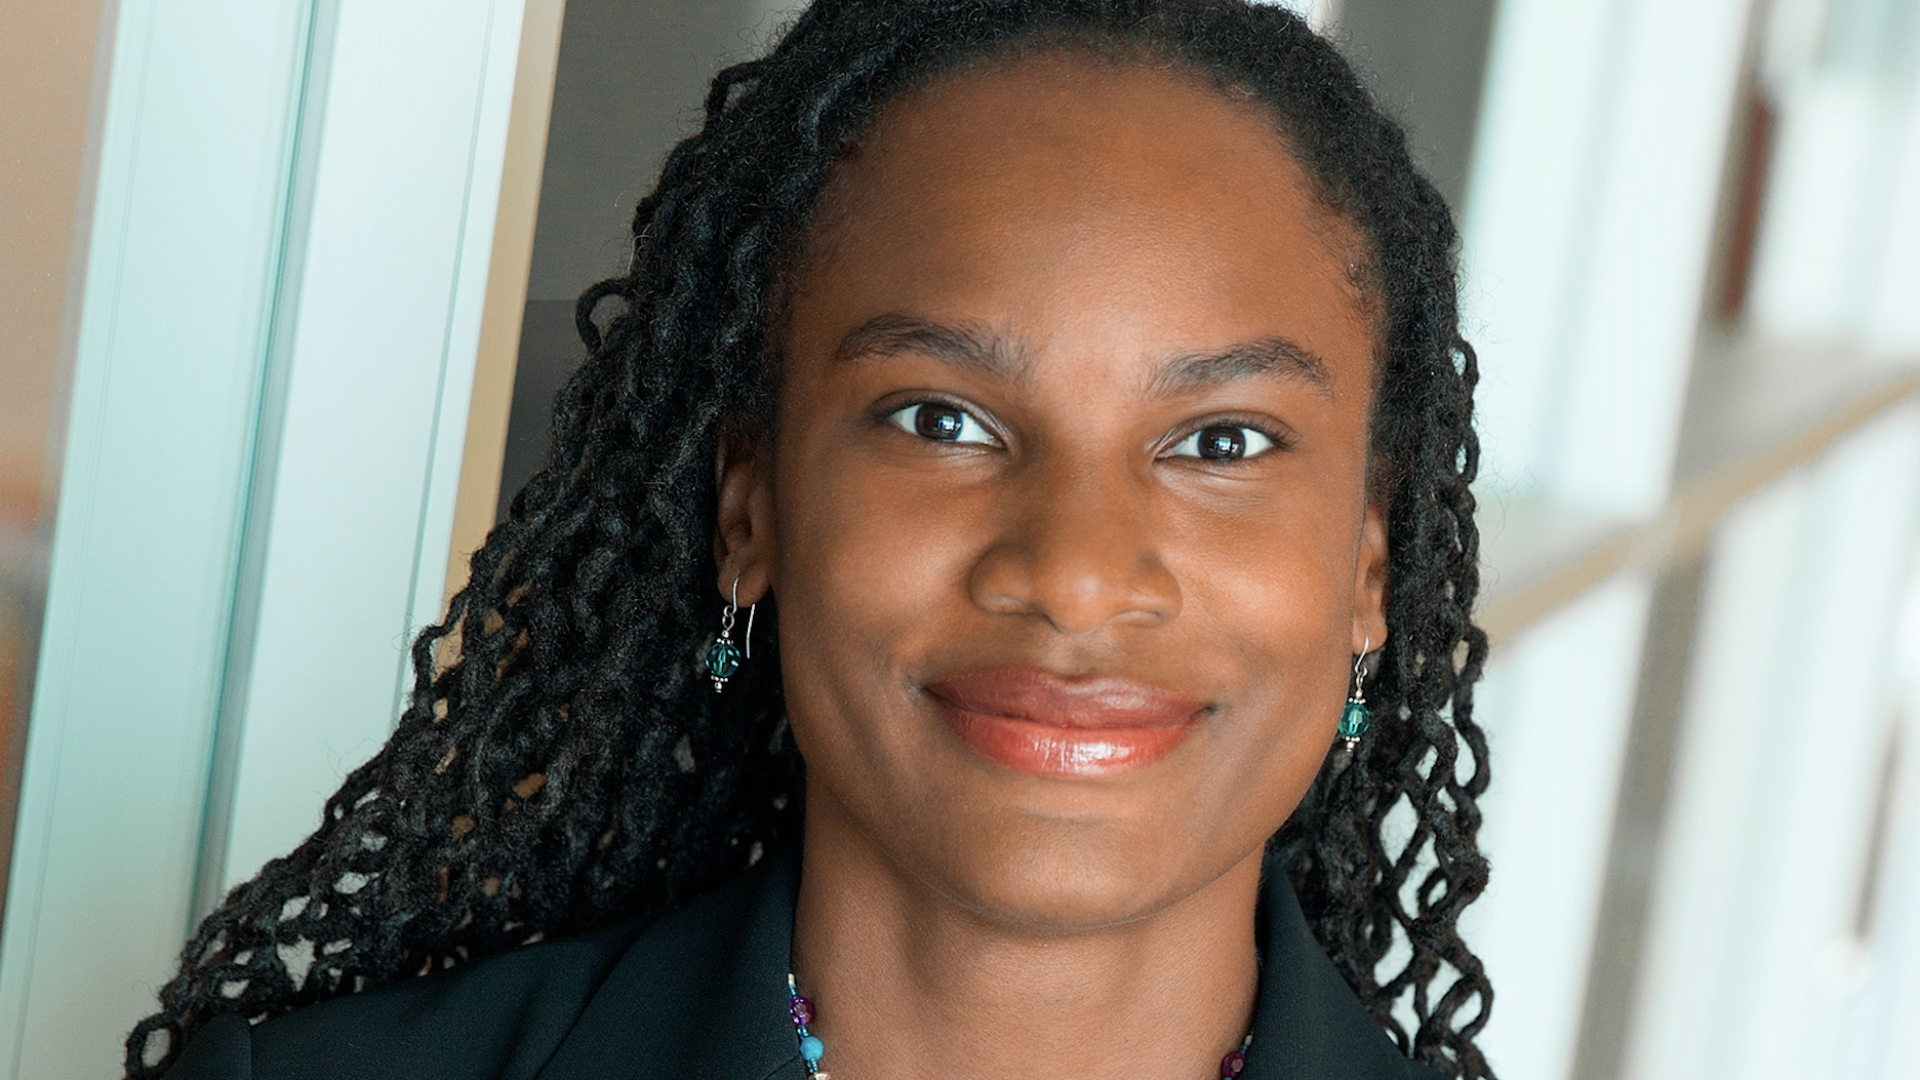 The Great Equalizer: This Former Elementary Teacher Turned Google Executive Is Pipelining STEM Opportunities for Black Girls. Here's How